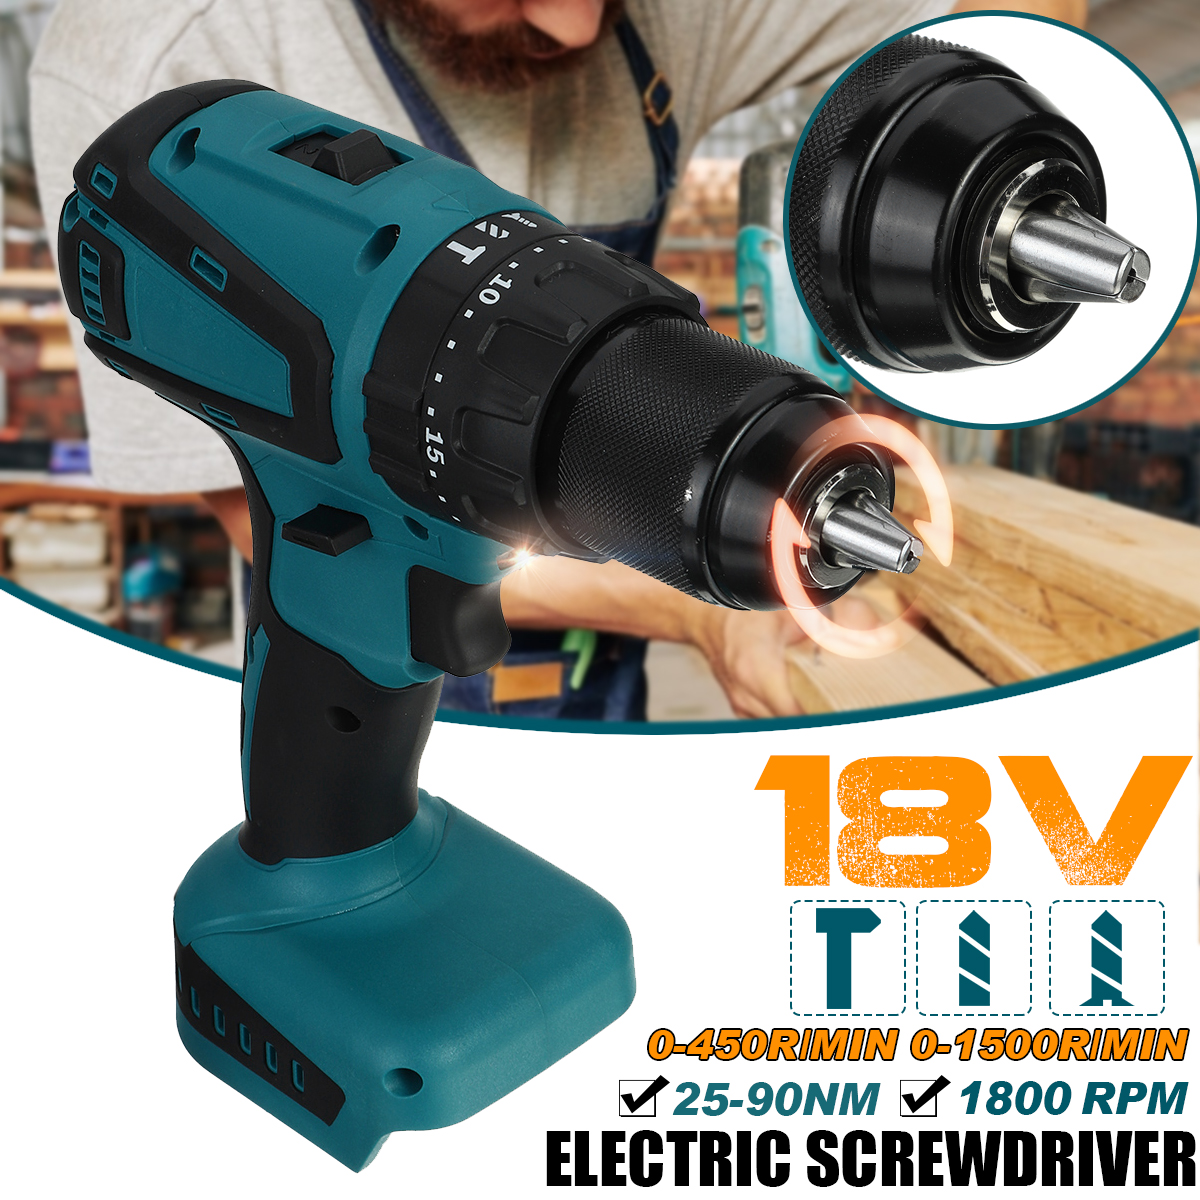 BLMIATKO-18V-2-Speed-Brushless-Impact-Drill-1013mm-Chuck-Rechargeable-Electric-Screwdriver-for-Makit-1759793-2